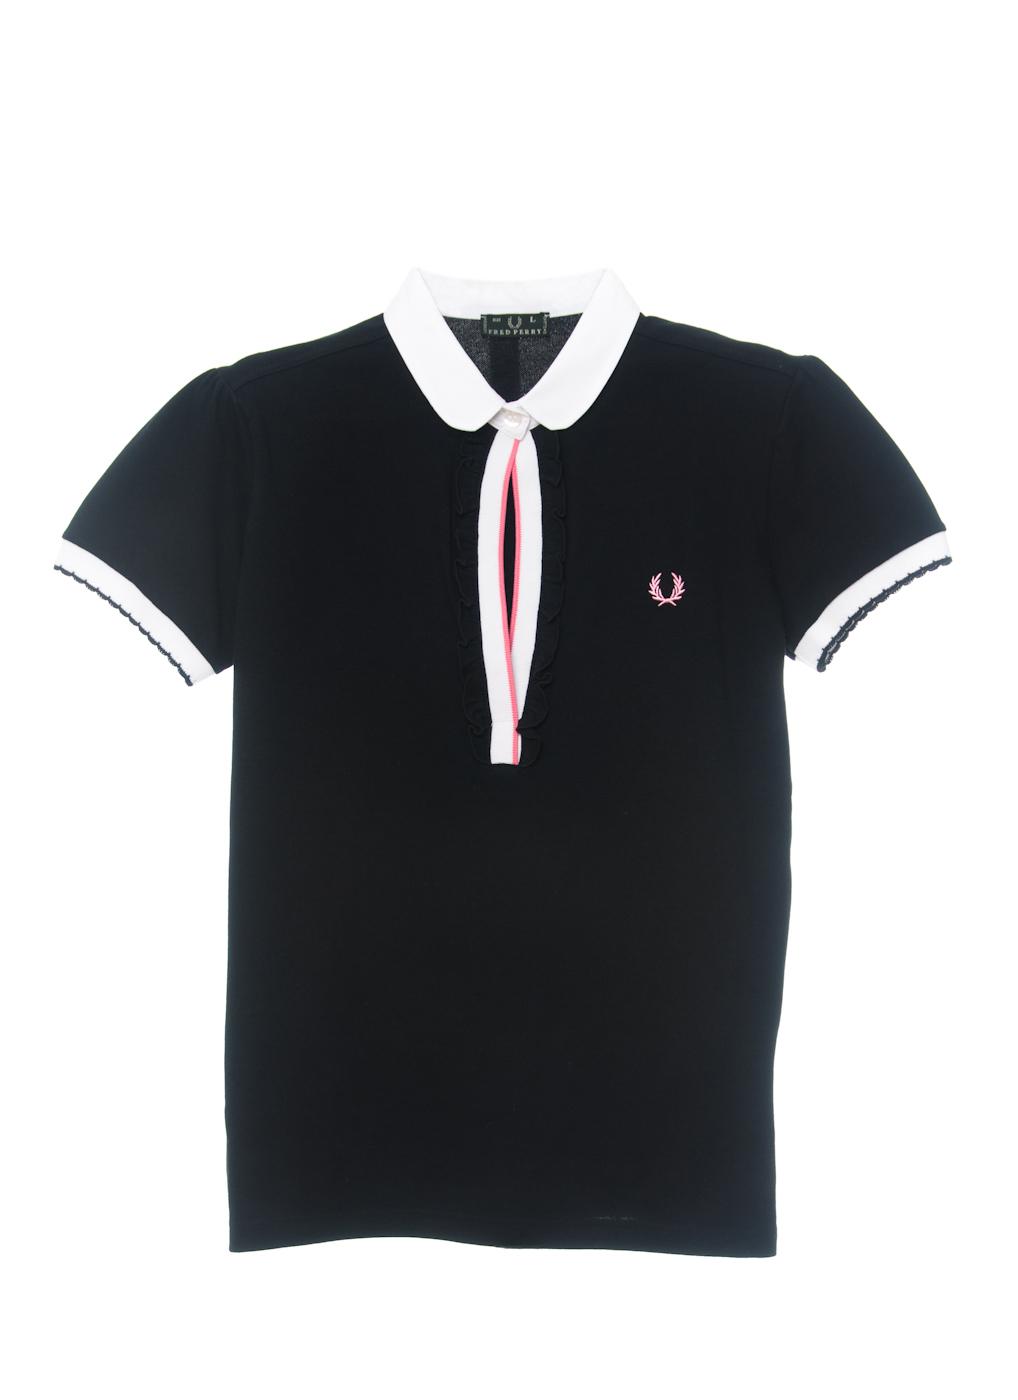 Foto Polo Fred Perry Spanish foto 183943